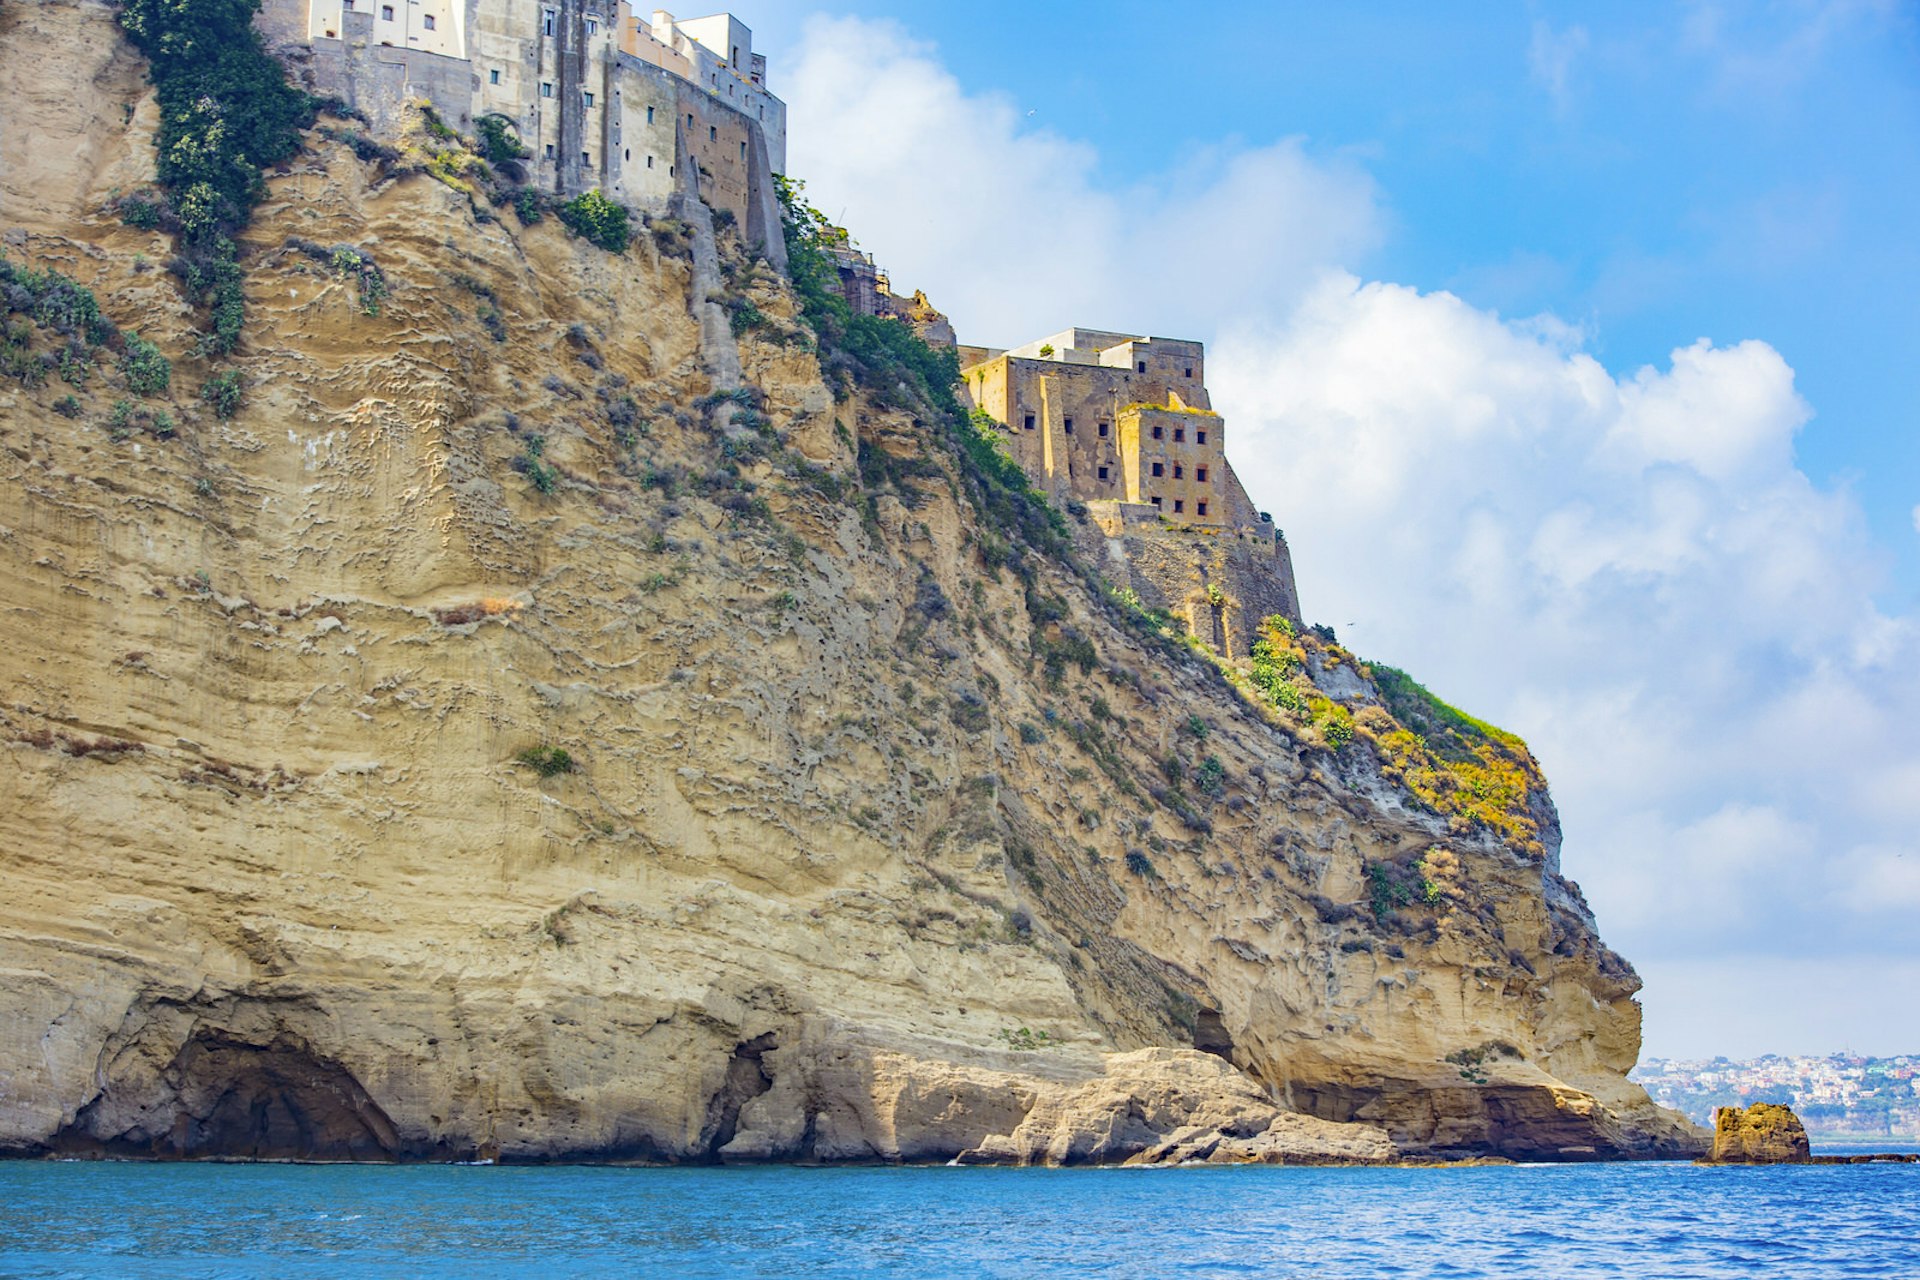 Historic, centuries-old stone buildings cling to the top of vertical cliffs that plunge down into the Mediterranean Sea.